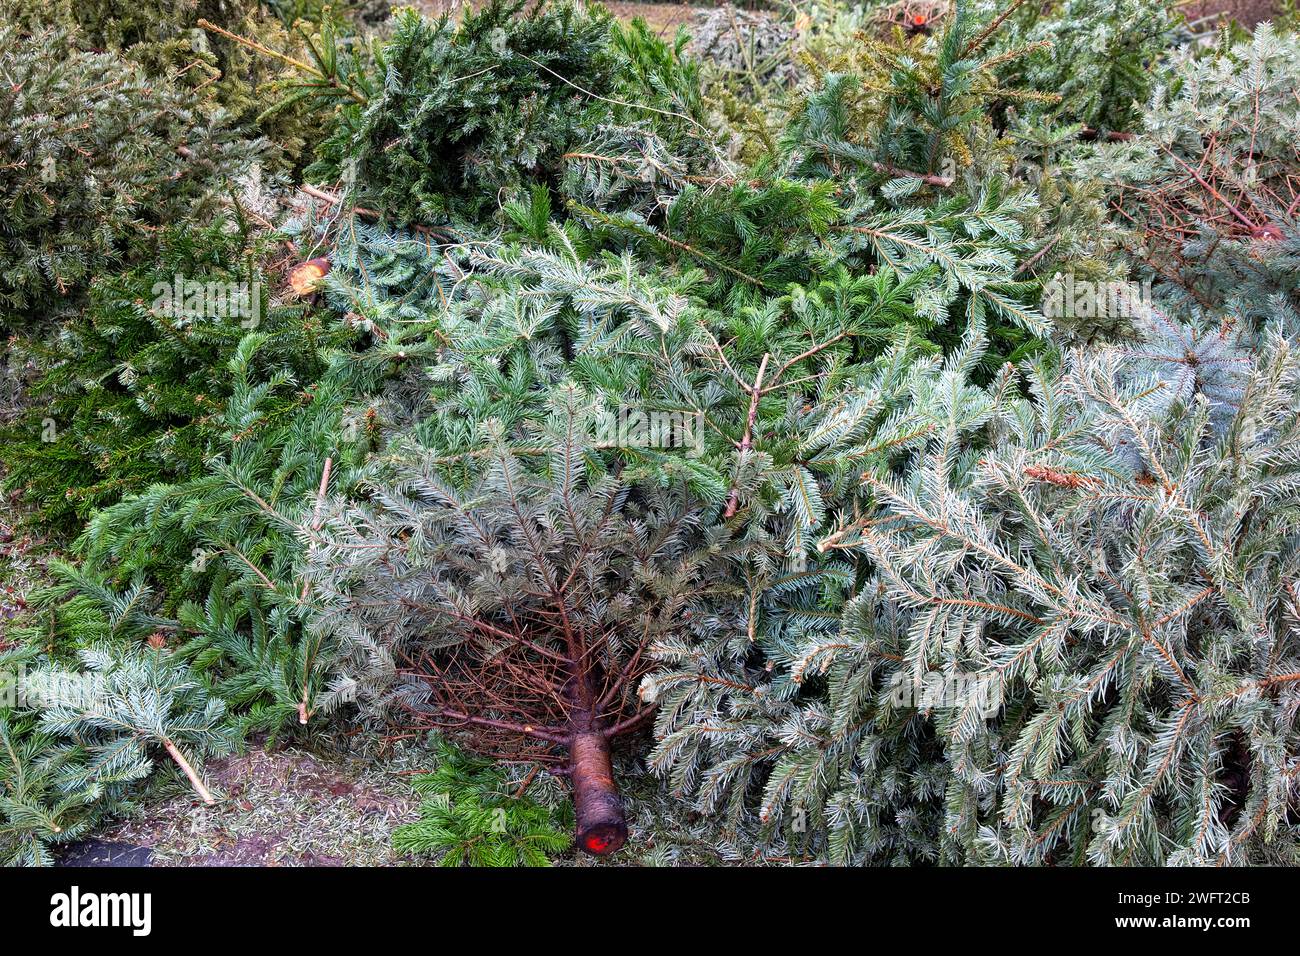 Christmas Tree Drop Off: Festive Recycling in Urban Park. Stock Photo